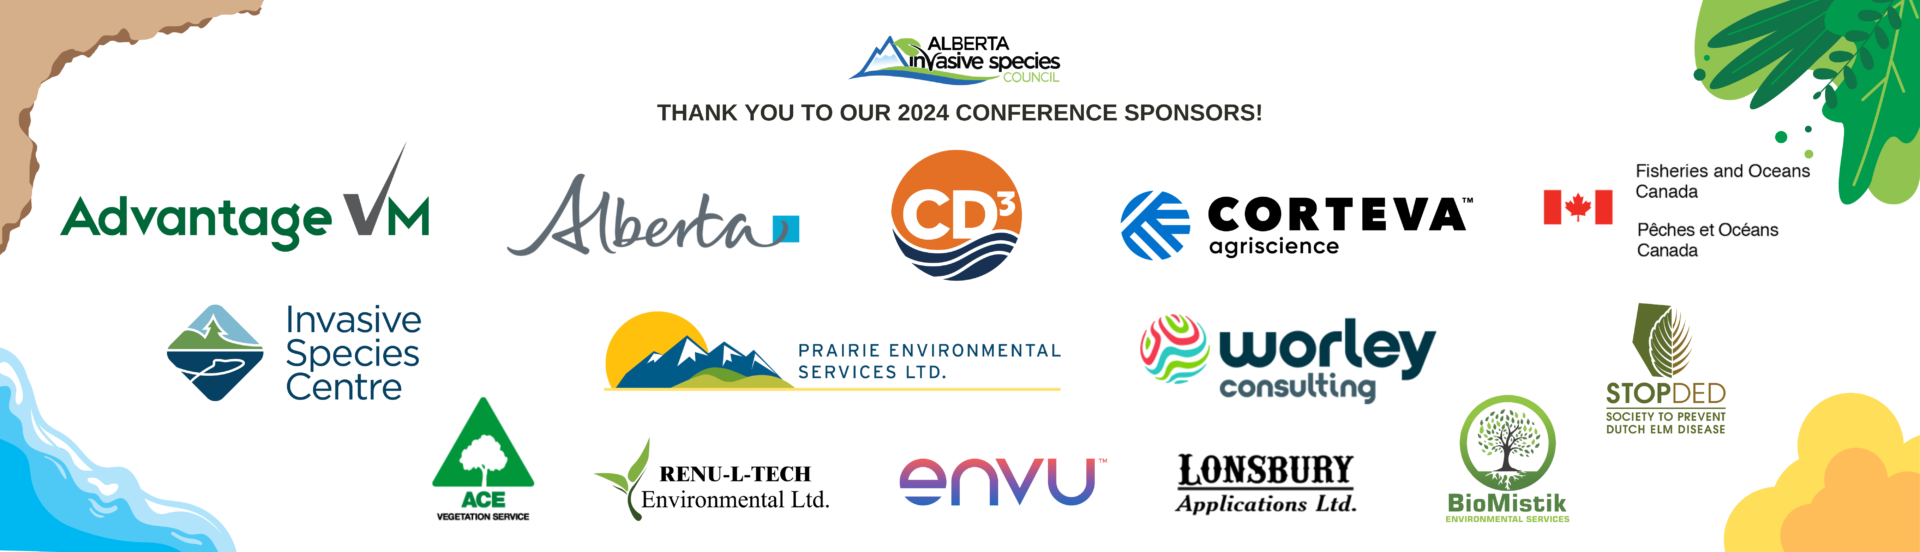 THANK YOU TO OUR 2024 CONFERENCE SPONSORS!